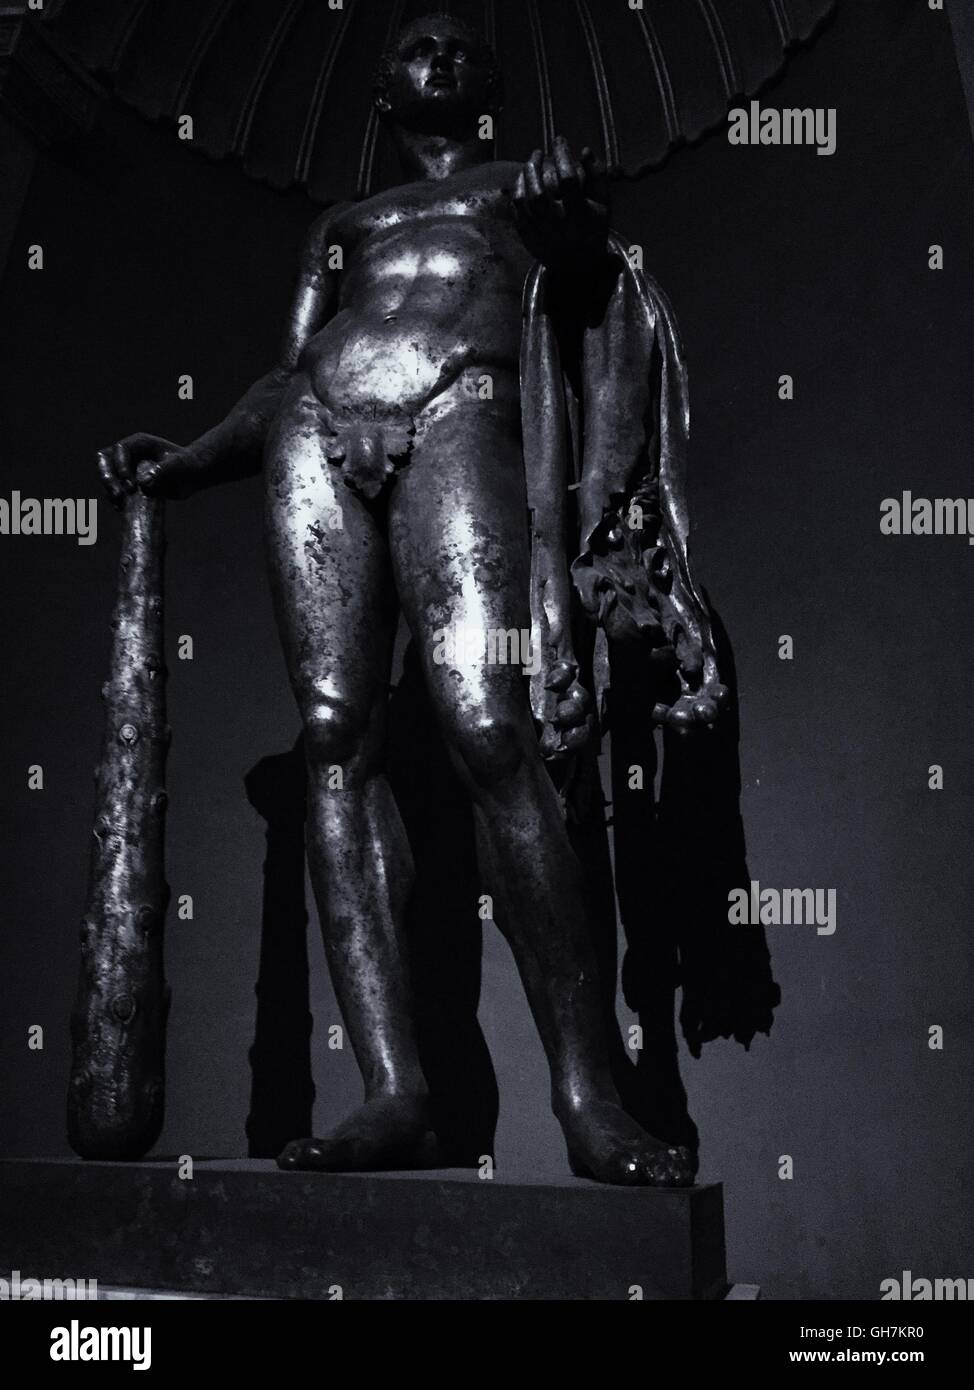 Vatican Museum, Rome, Italy, The bronze gilded cult statue of Hercules of the Theatre of Pompey in the Round Room, Sala Rotonda. Stock Photo